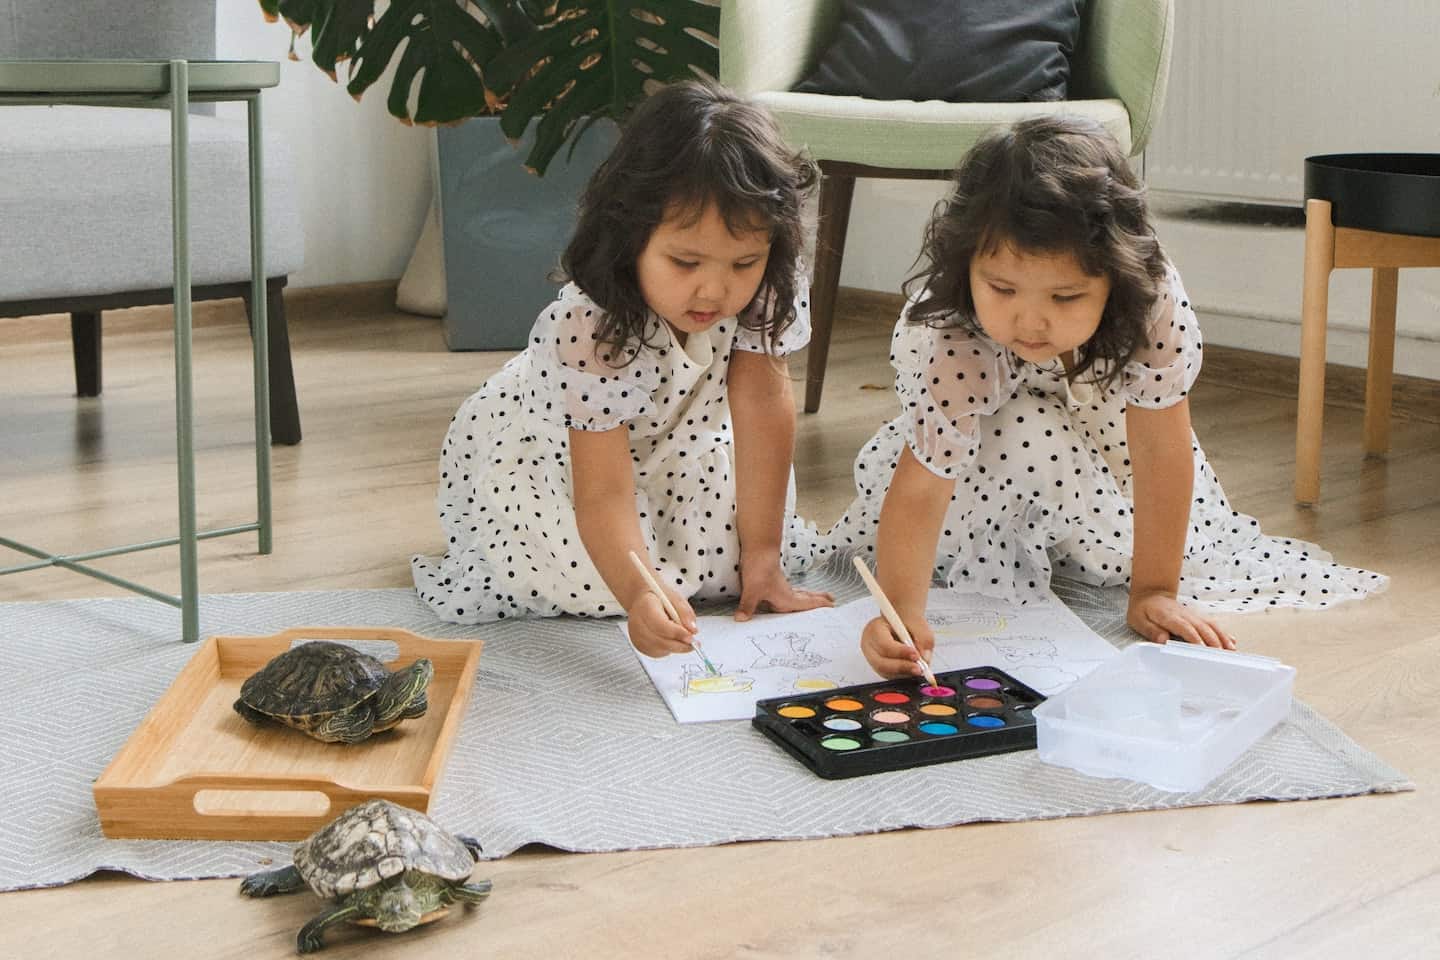 twin girls coloring on the floor